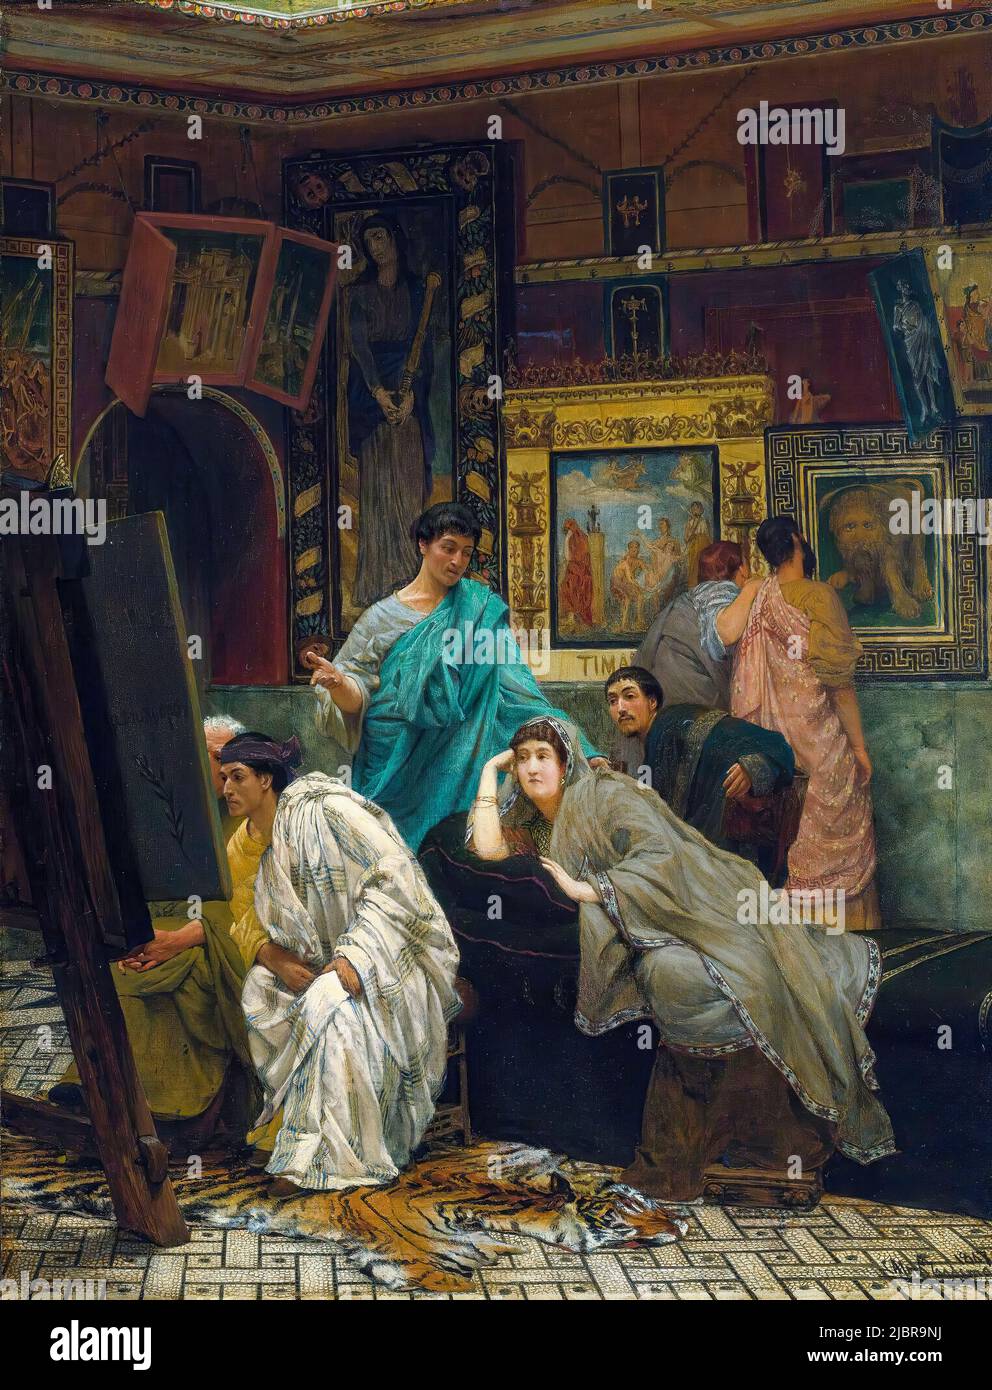 Sir Lawrence Alma Tadema, A Collector of Pictures at the Time of Augustus, painting in oil on canvas, 1867 Stock Photo